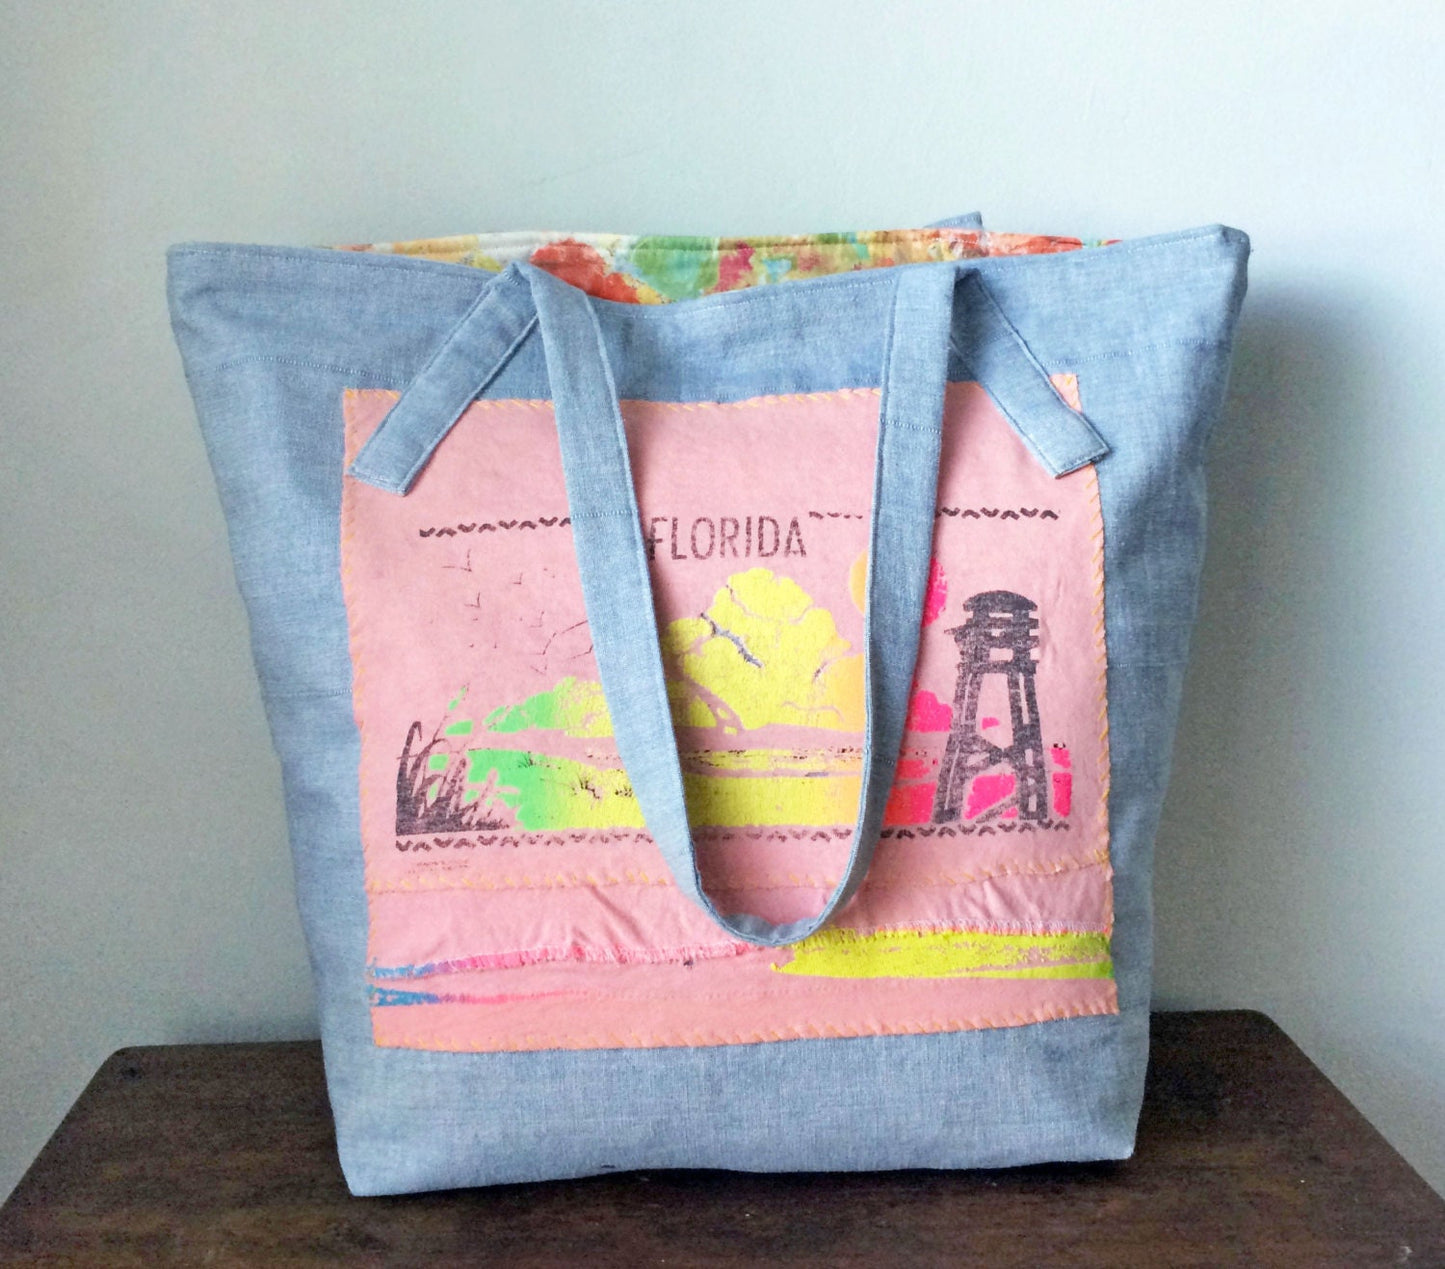 2 Faced Upcycled TeeShirt Tote - Reclaimed Materials